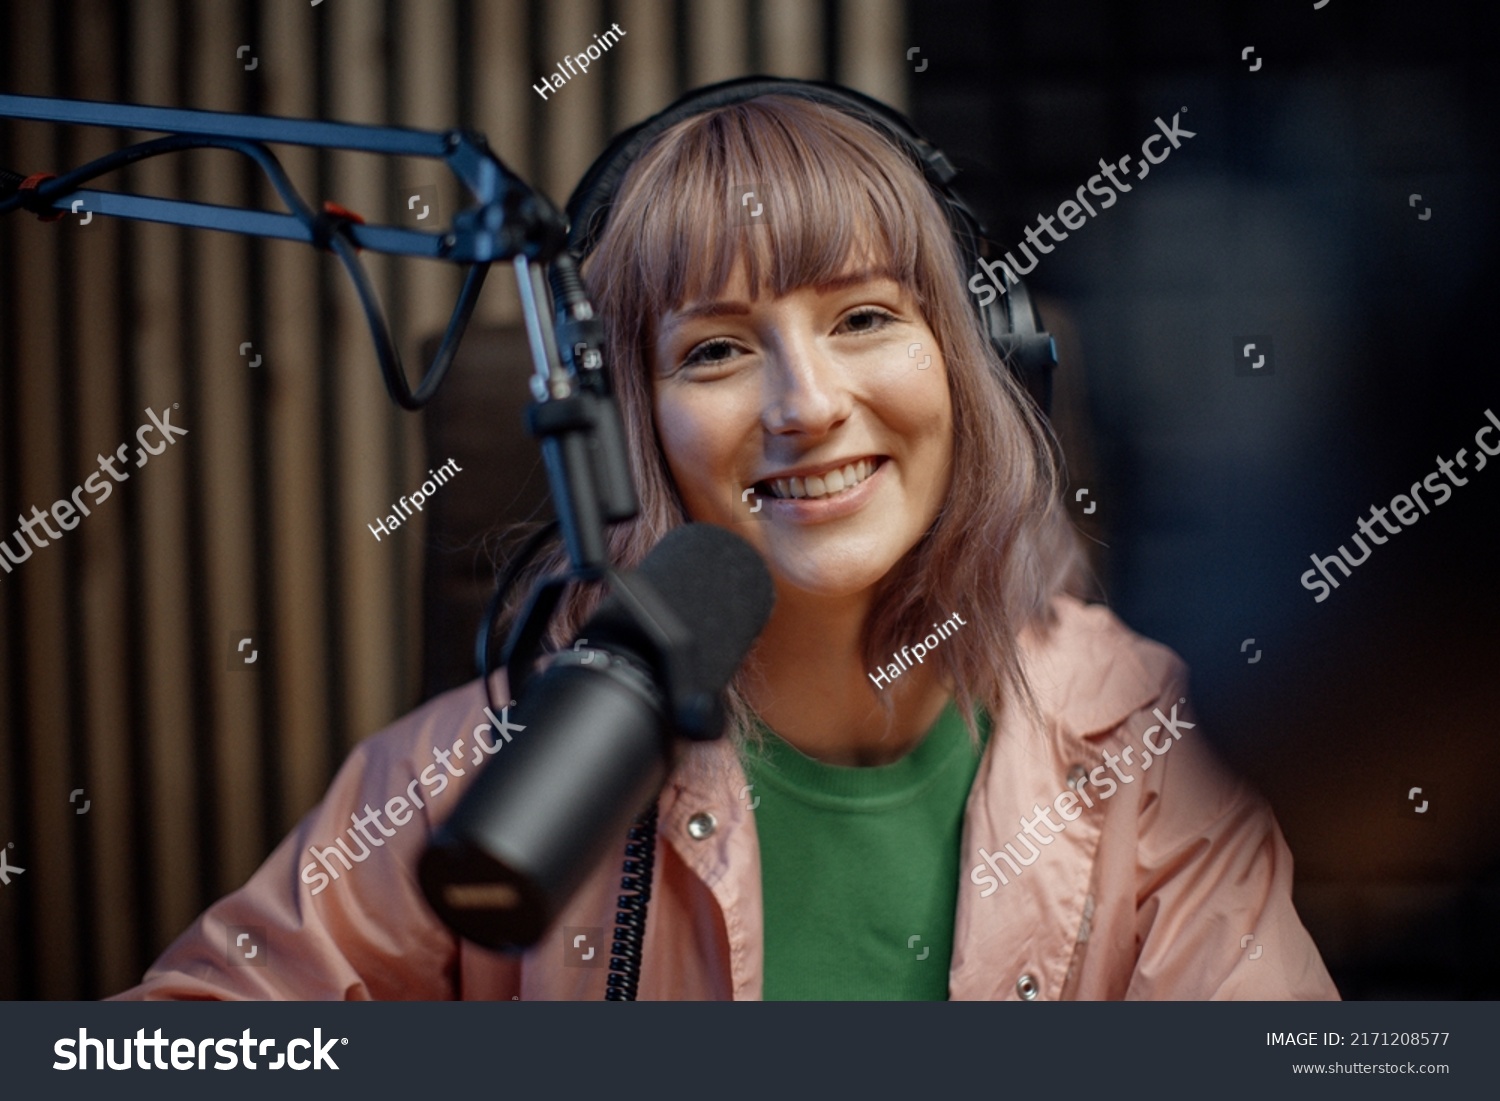 Portrait of female radio host speaking in microphone while moderating a live show #2171208577